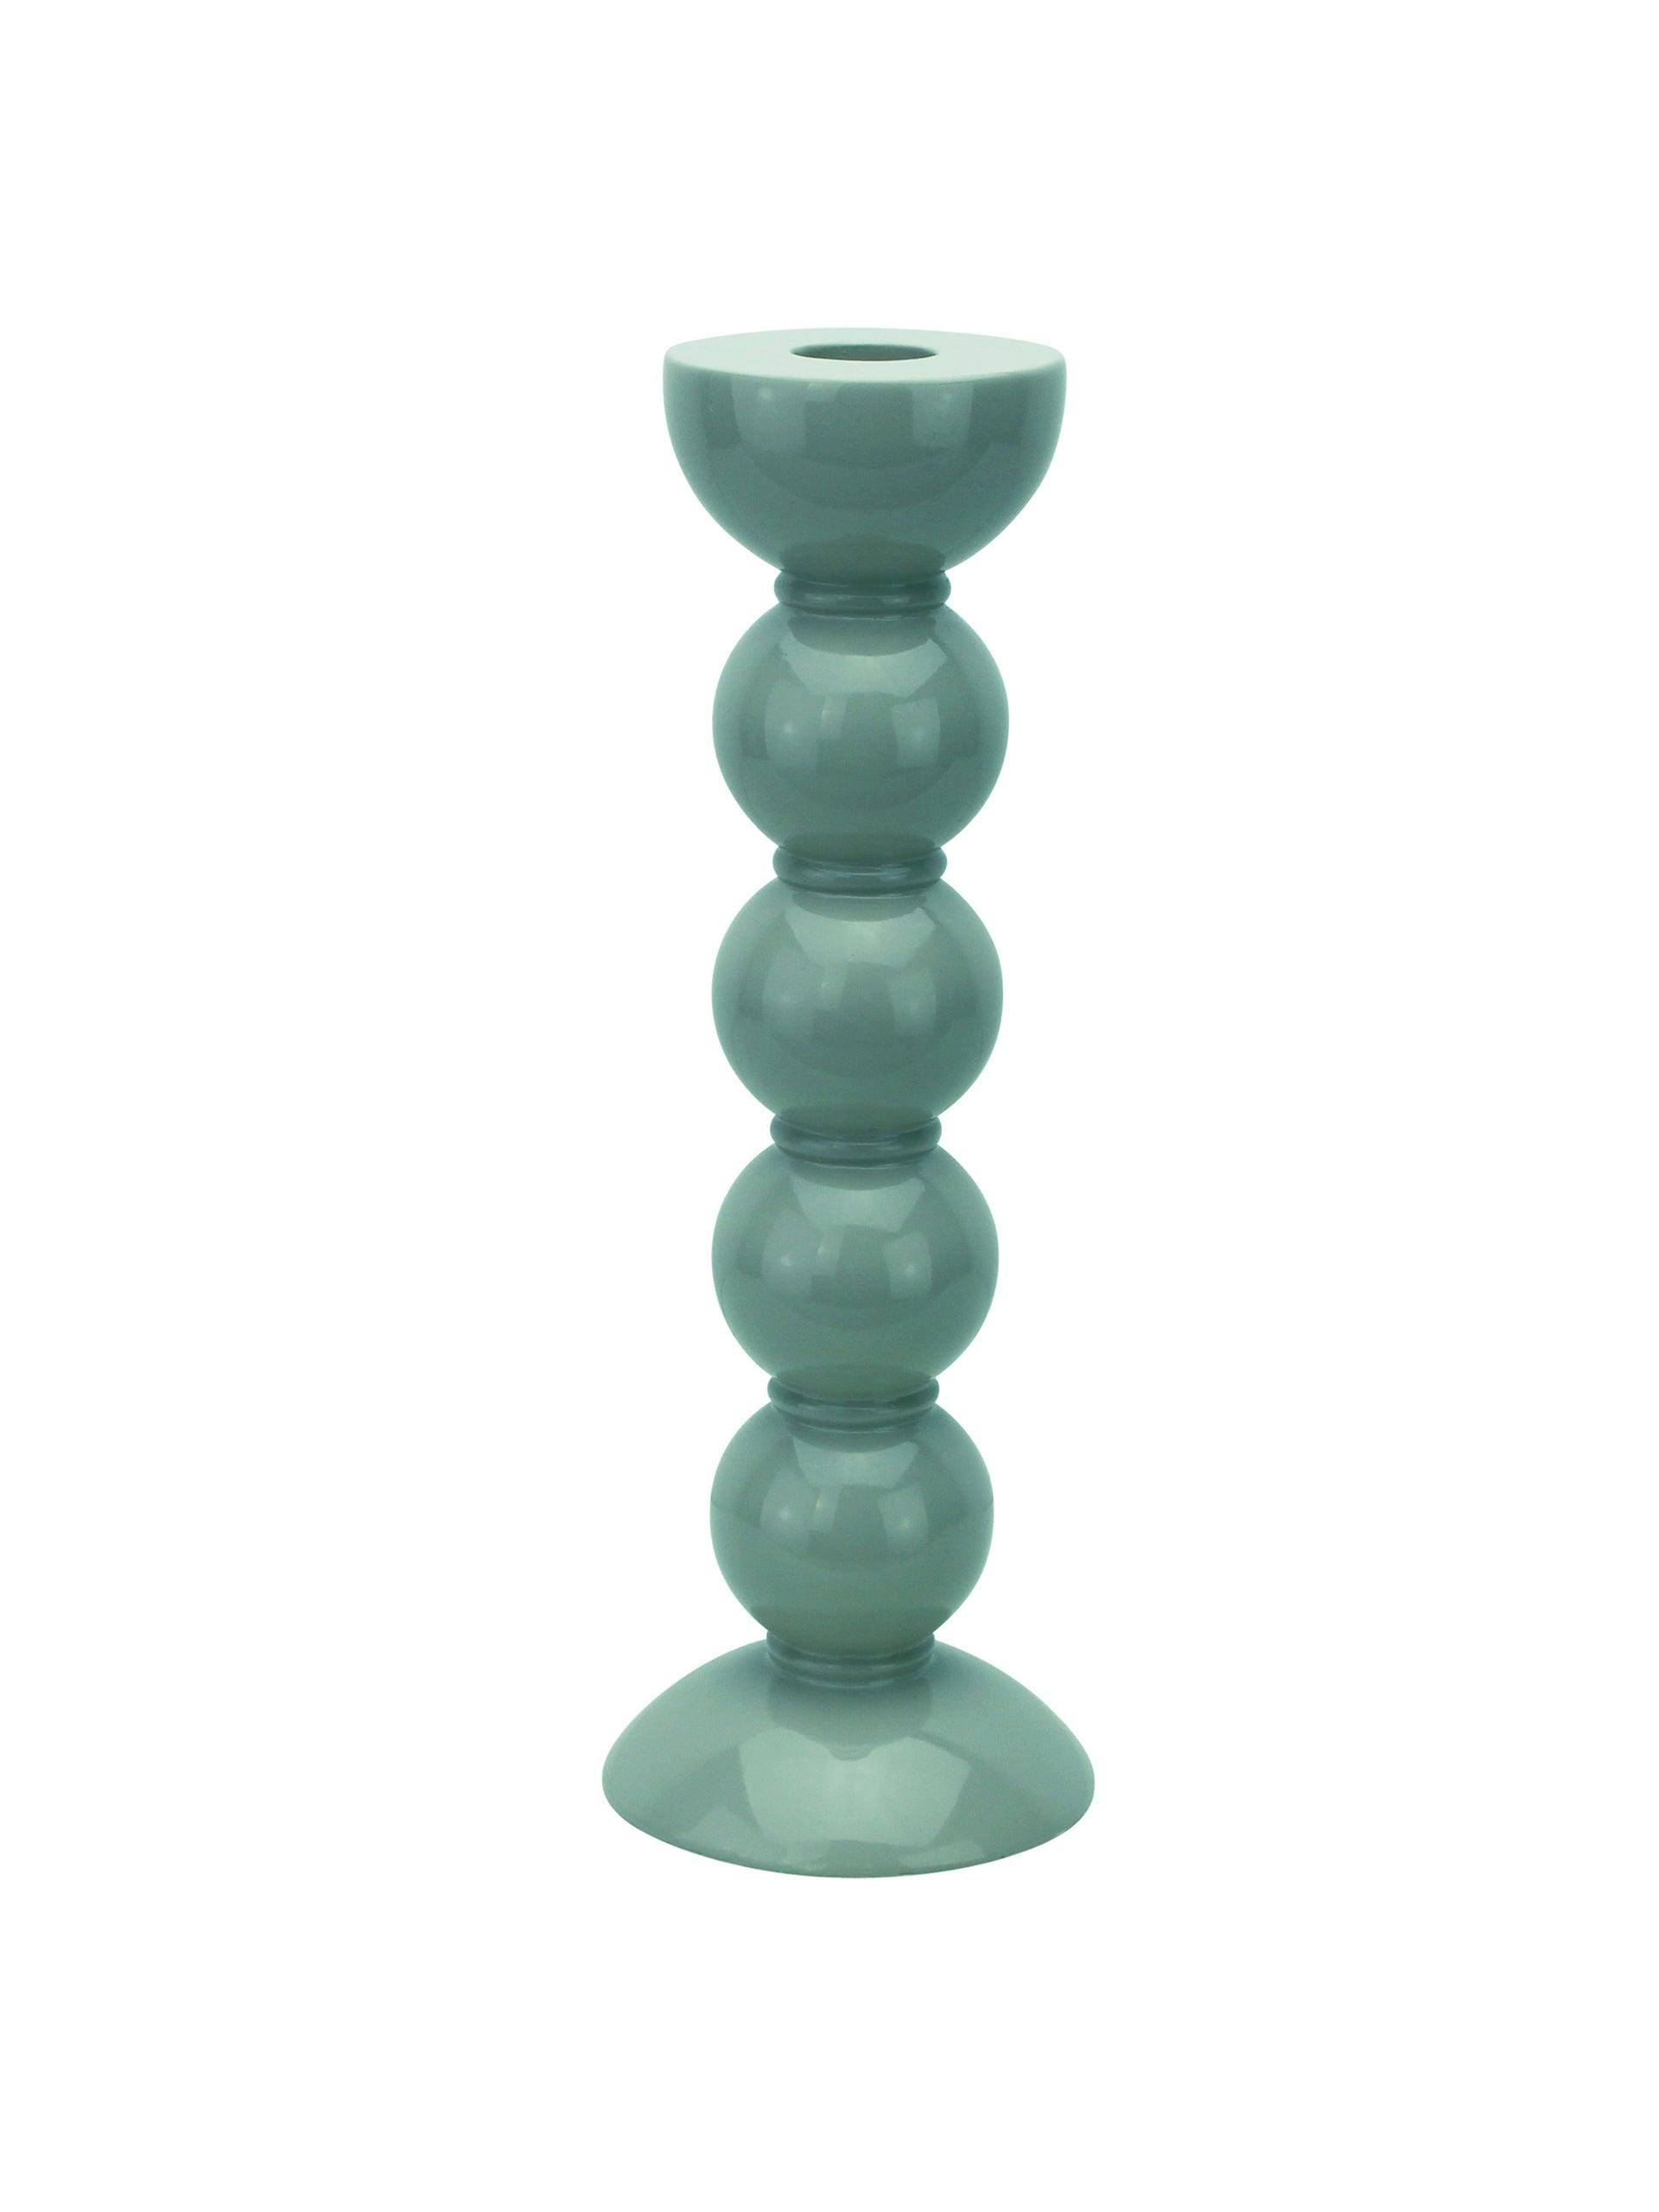 Tall bobbin candlestick in Chambray blue